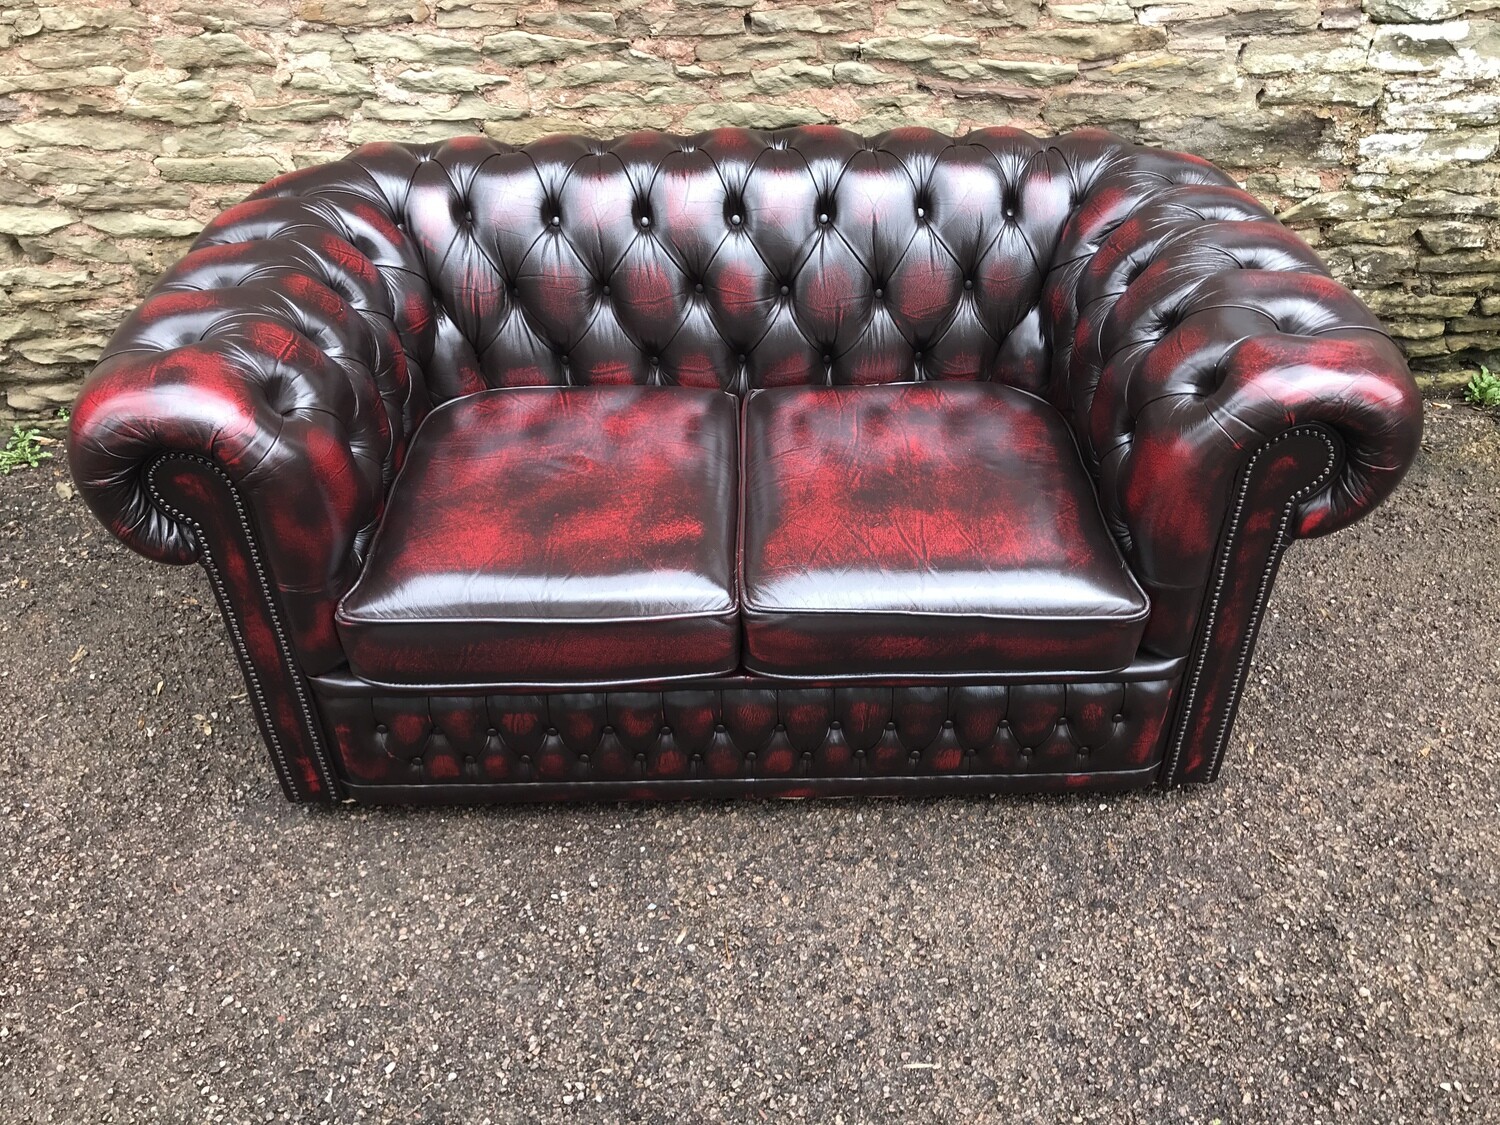 Oxblood Leather Chesterfield Sofa 2 Seater Made By Winchester Furniture